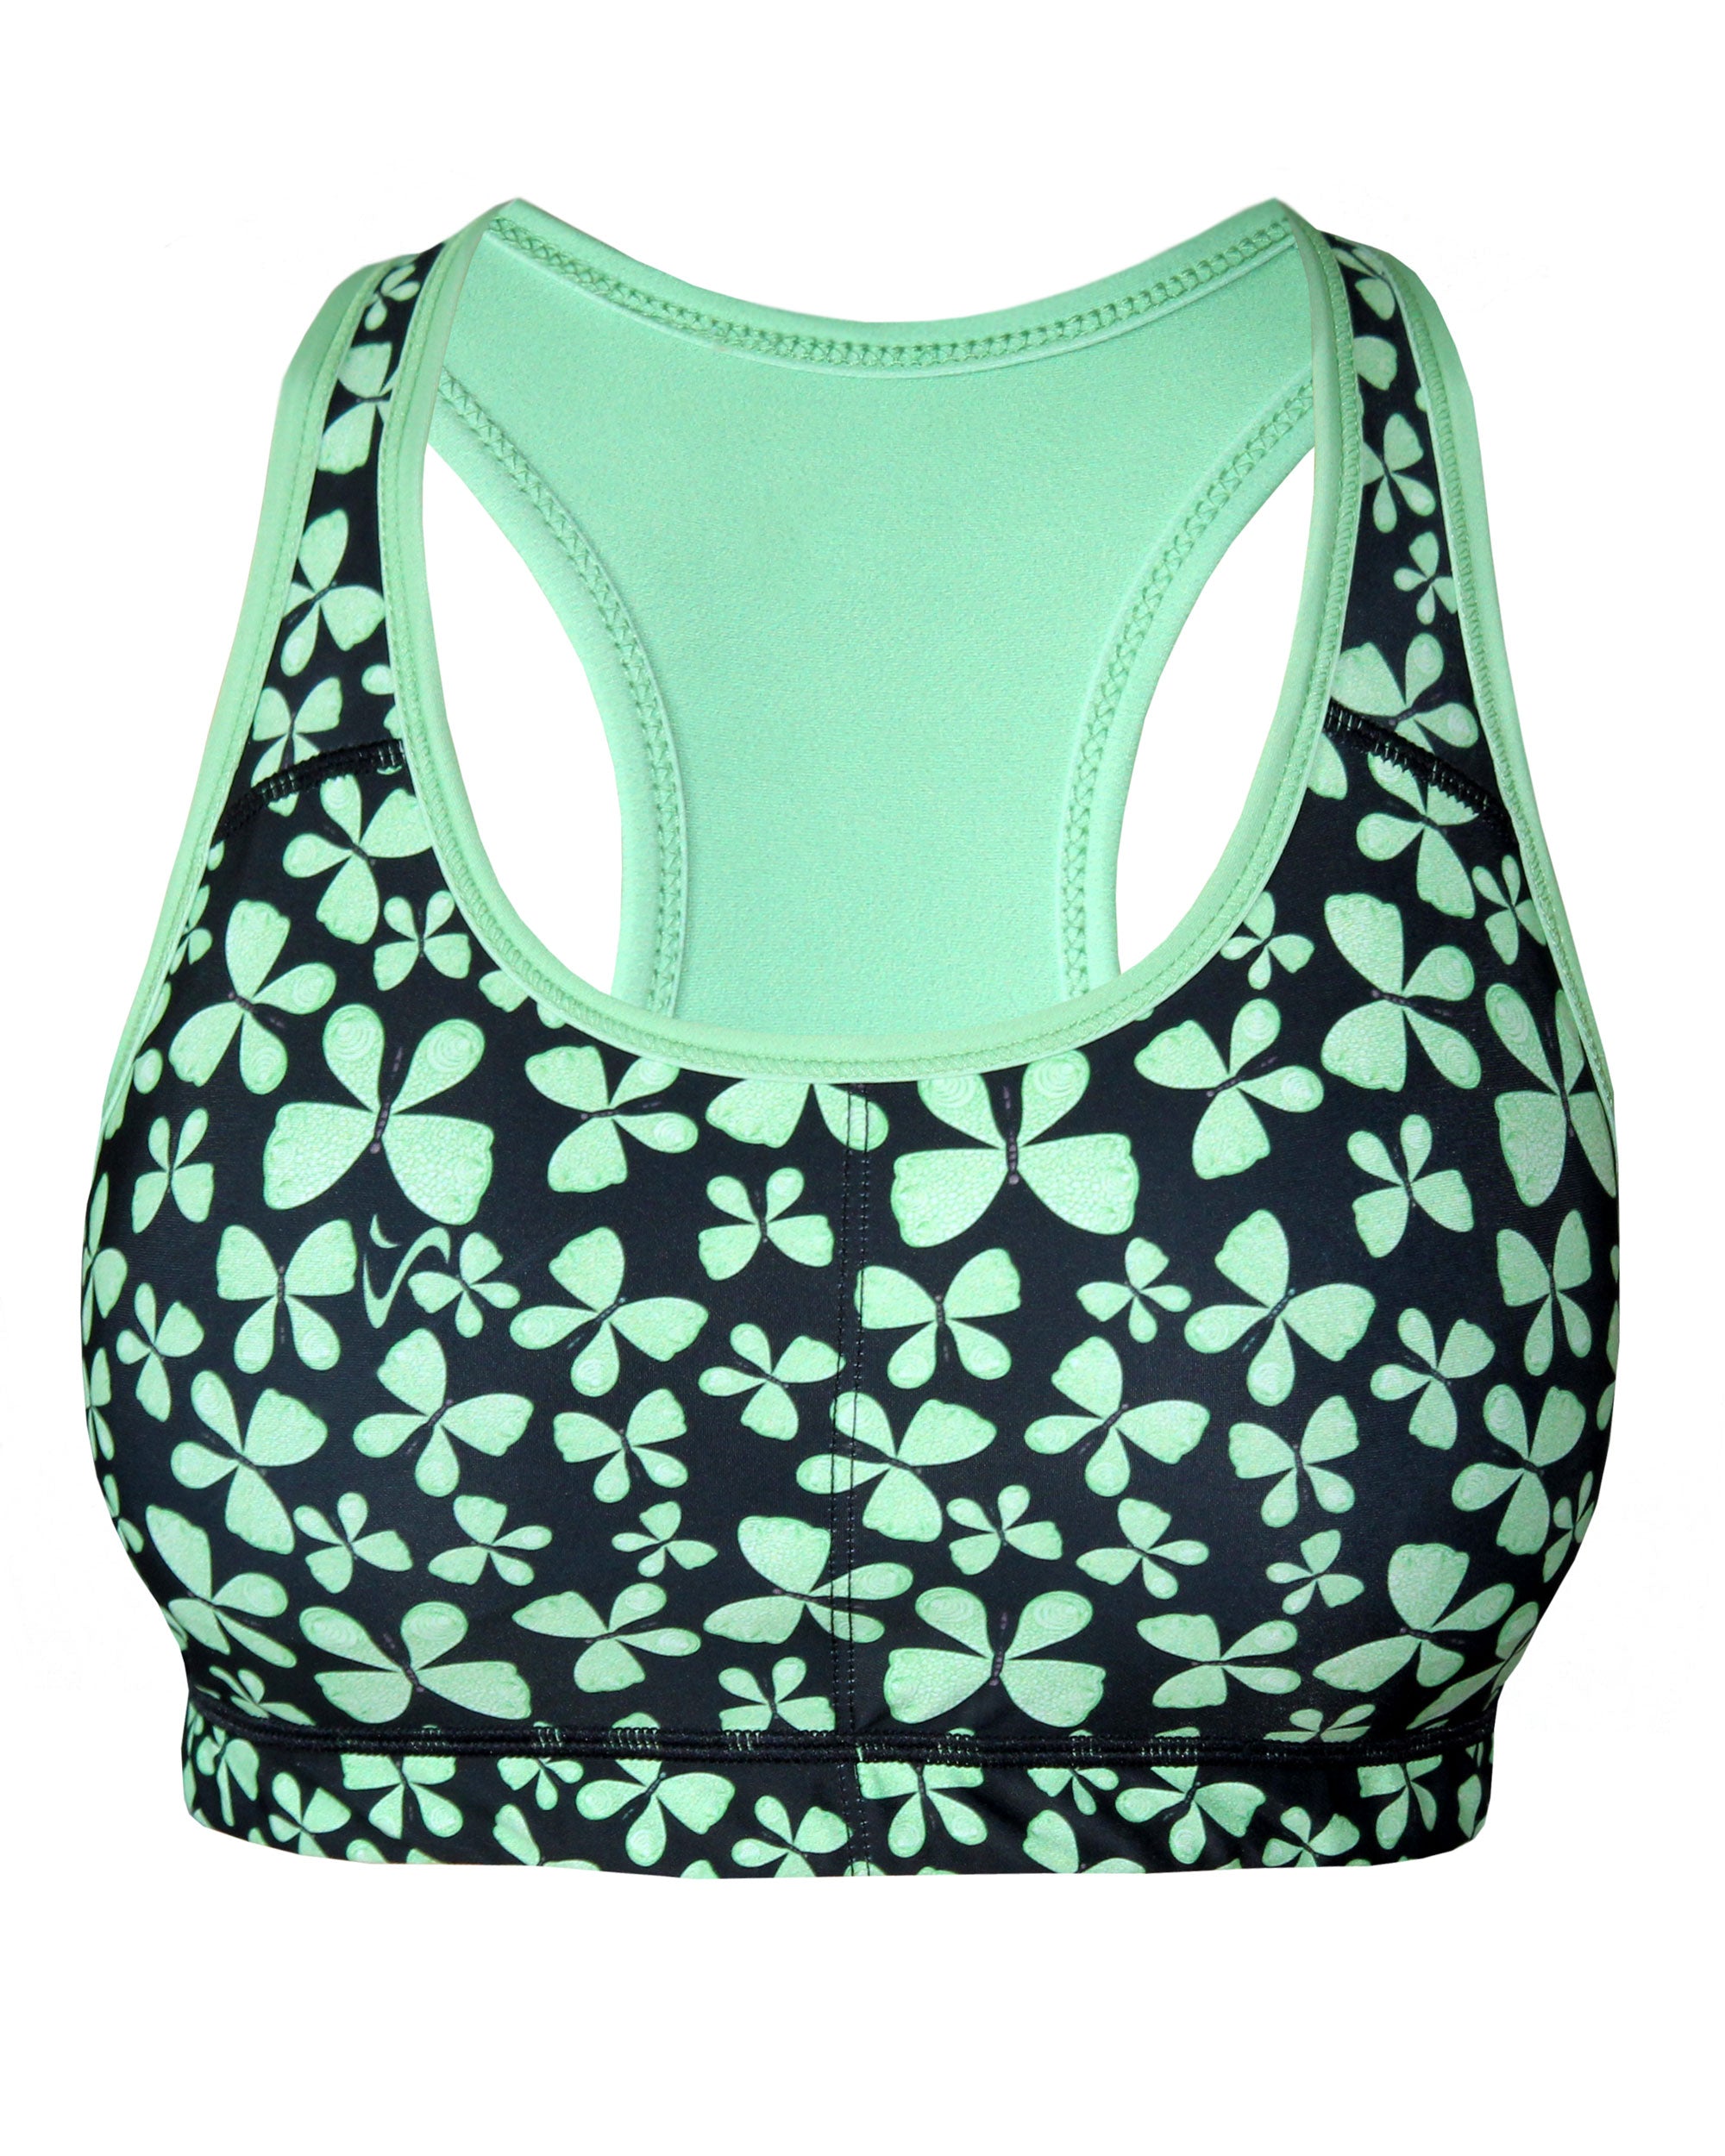 Supportive Sportsbra for running, padel and working out at the gym. Perfect gym set.